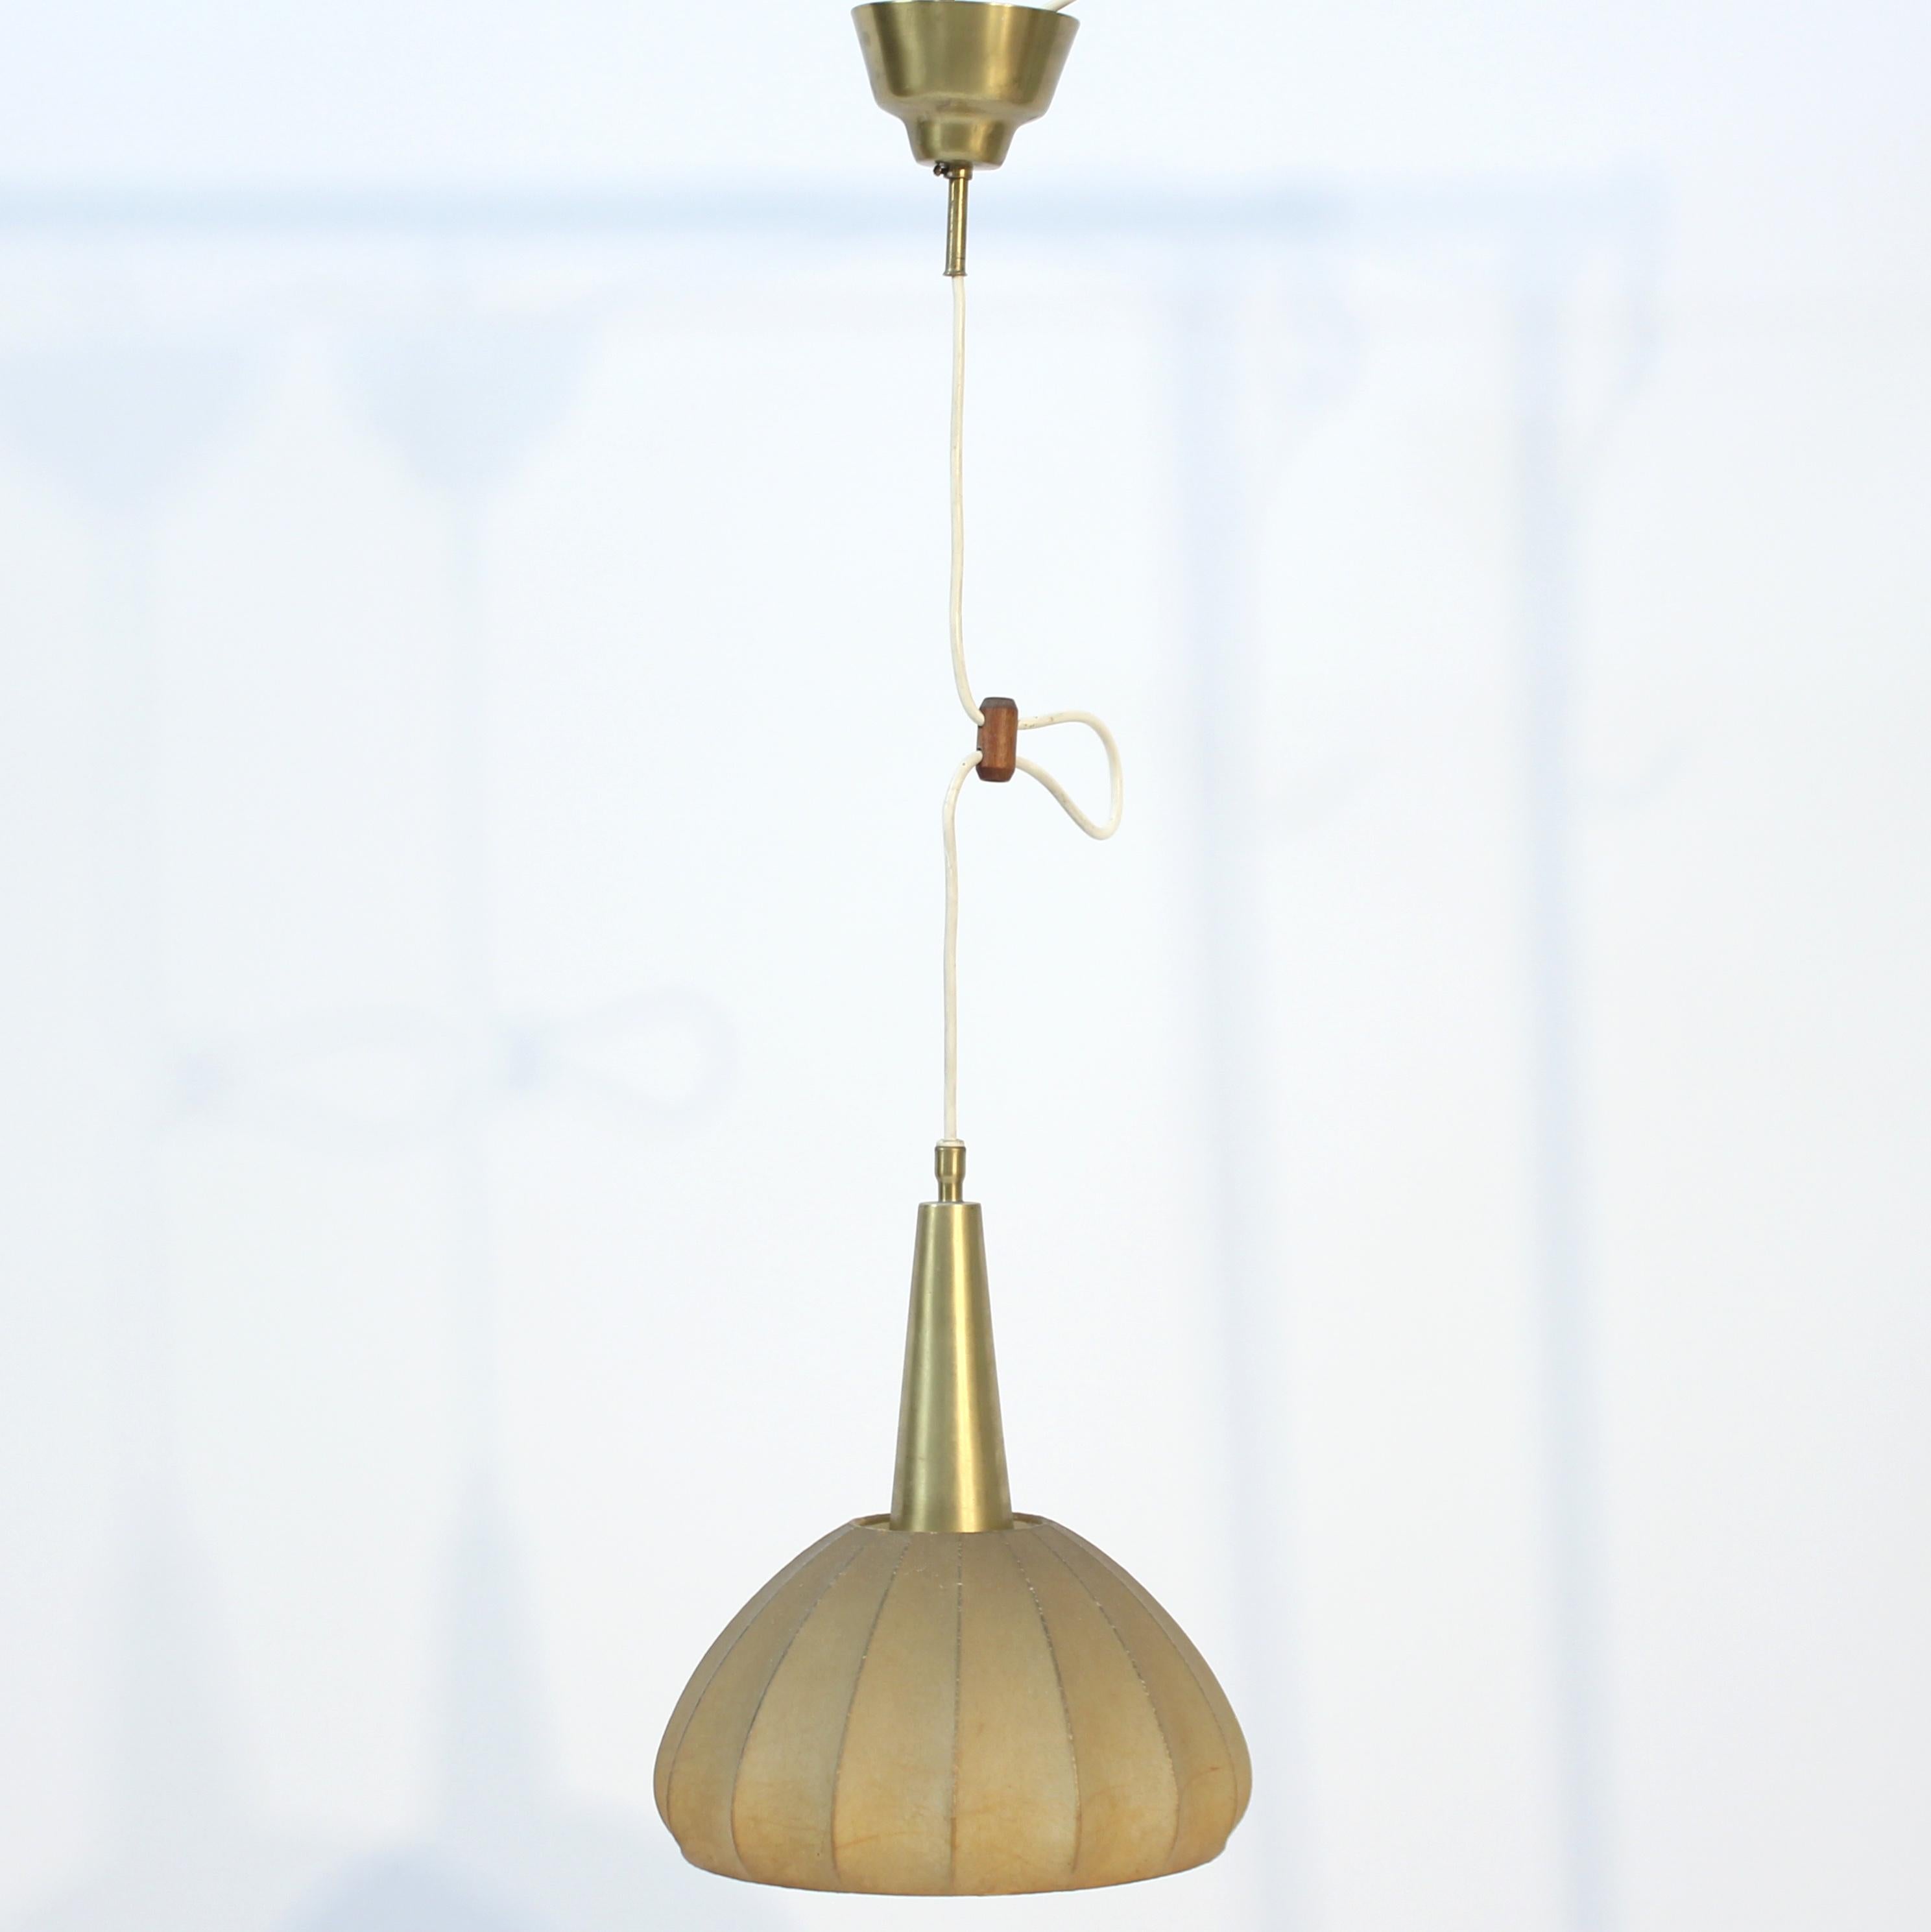 Rare ceiling lamp attributed to Hans Bergström for Ateljé Lyktan. Brass ceiling cup made by Ateljé Lyktan with its unmistakable shape. Brass rod that holds the 